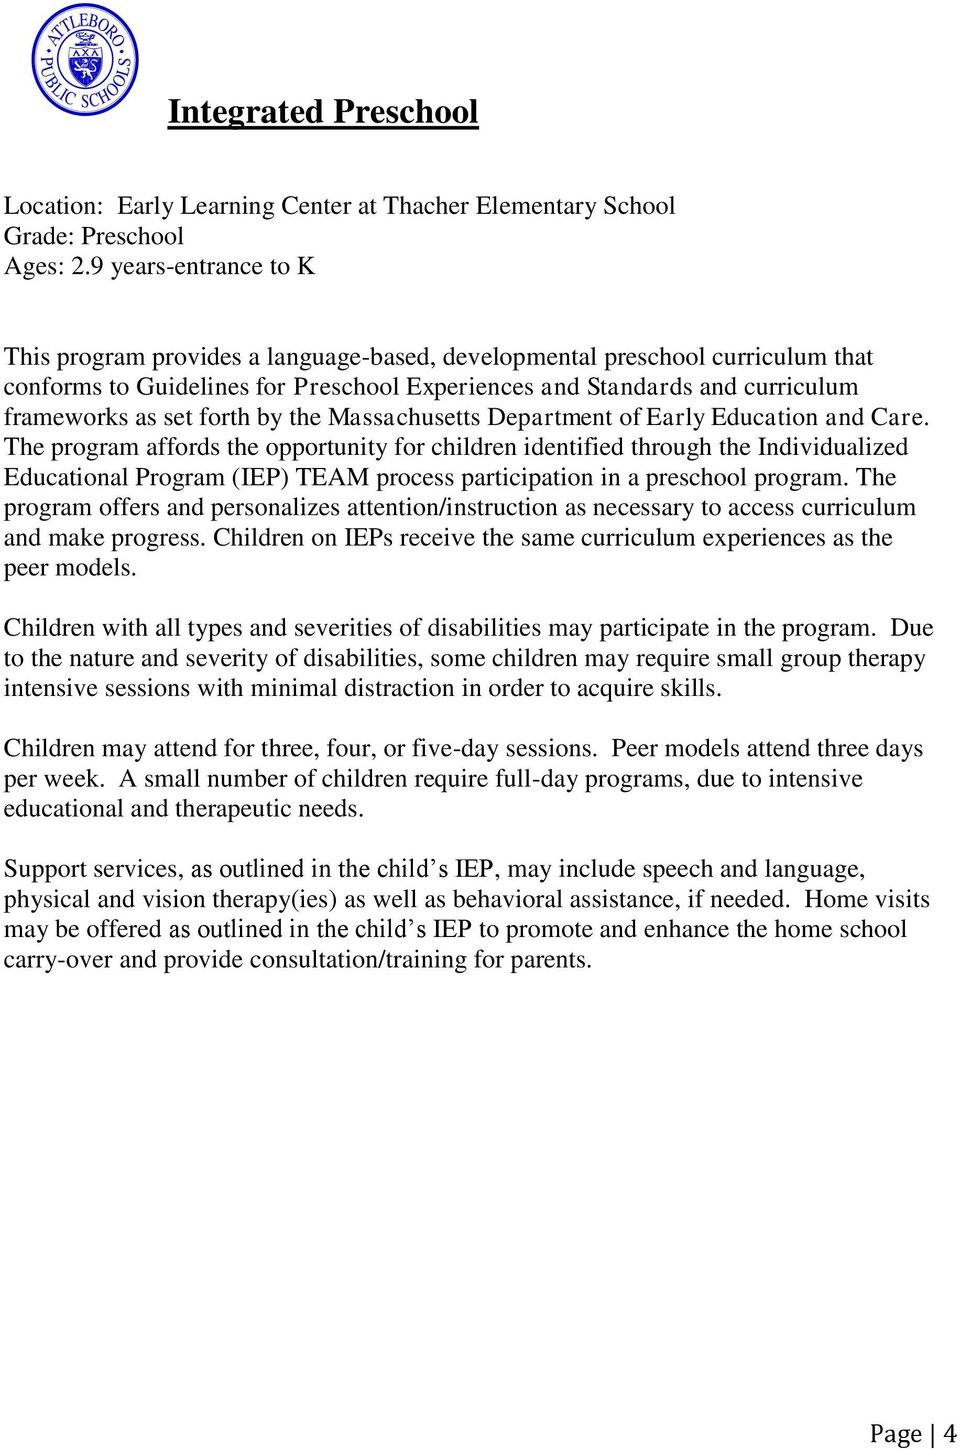 forth by the Massachusetts Department of Early Education and Care.